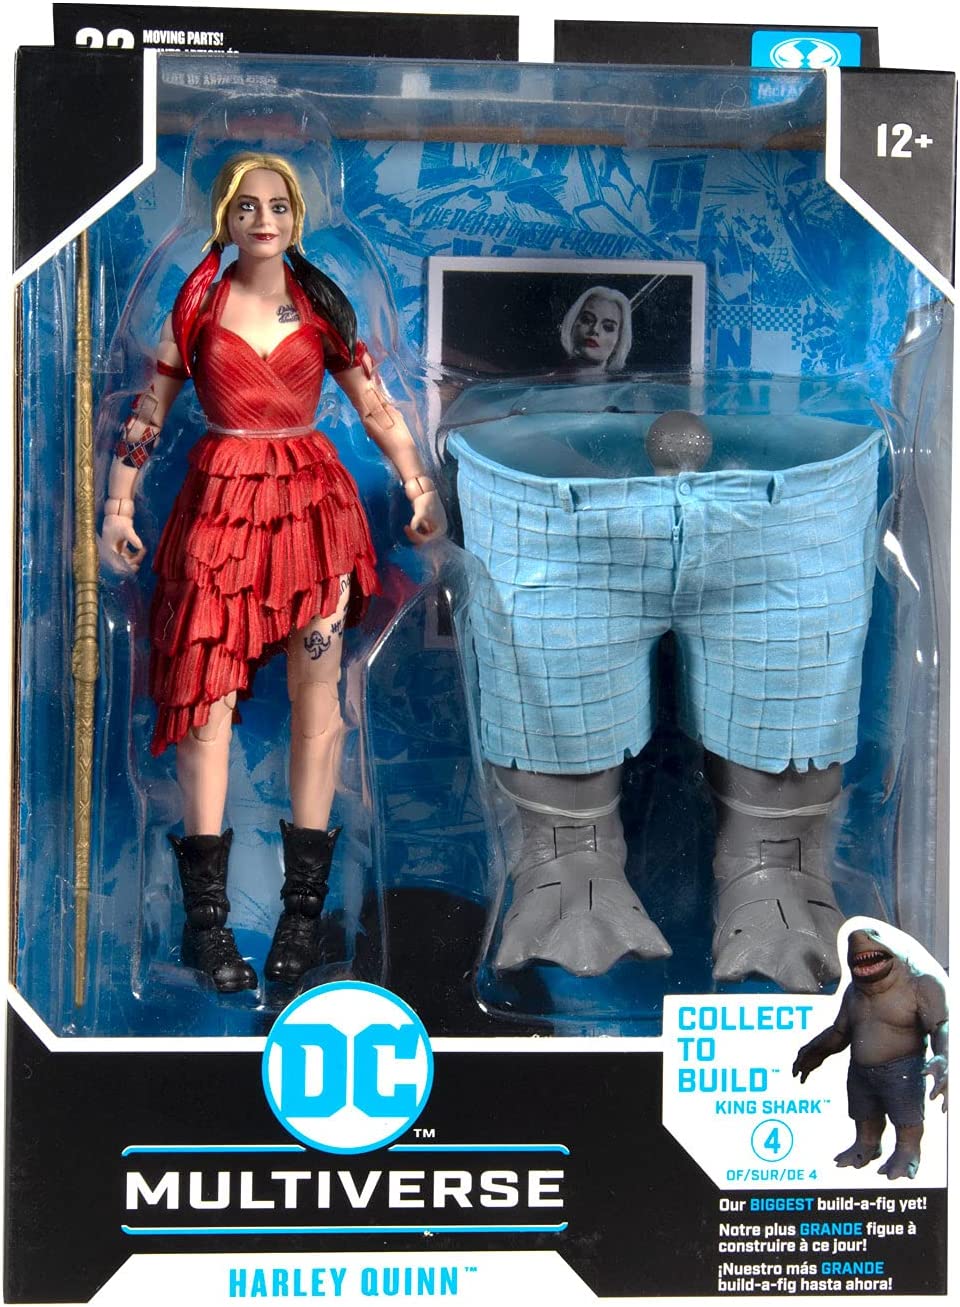 McFarlane Toys DC Multiverse Harley Quinn The Suicide Squad 7" Action Figure